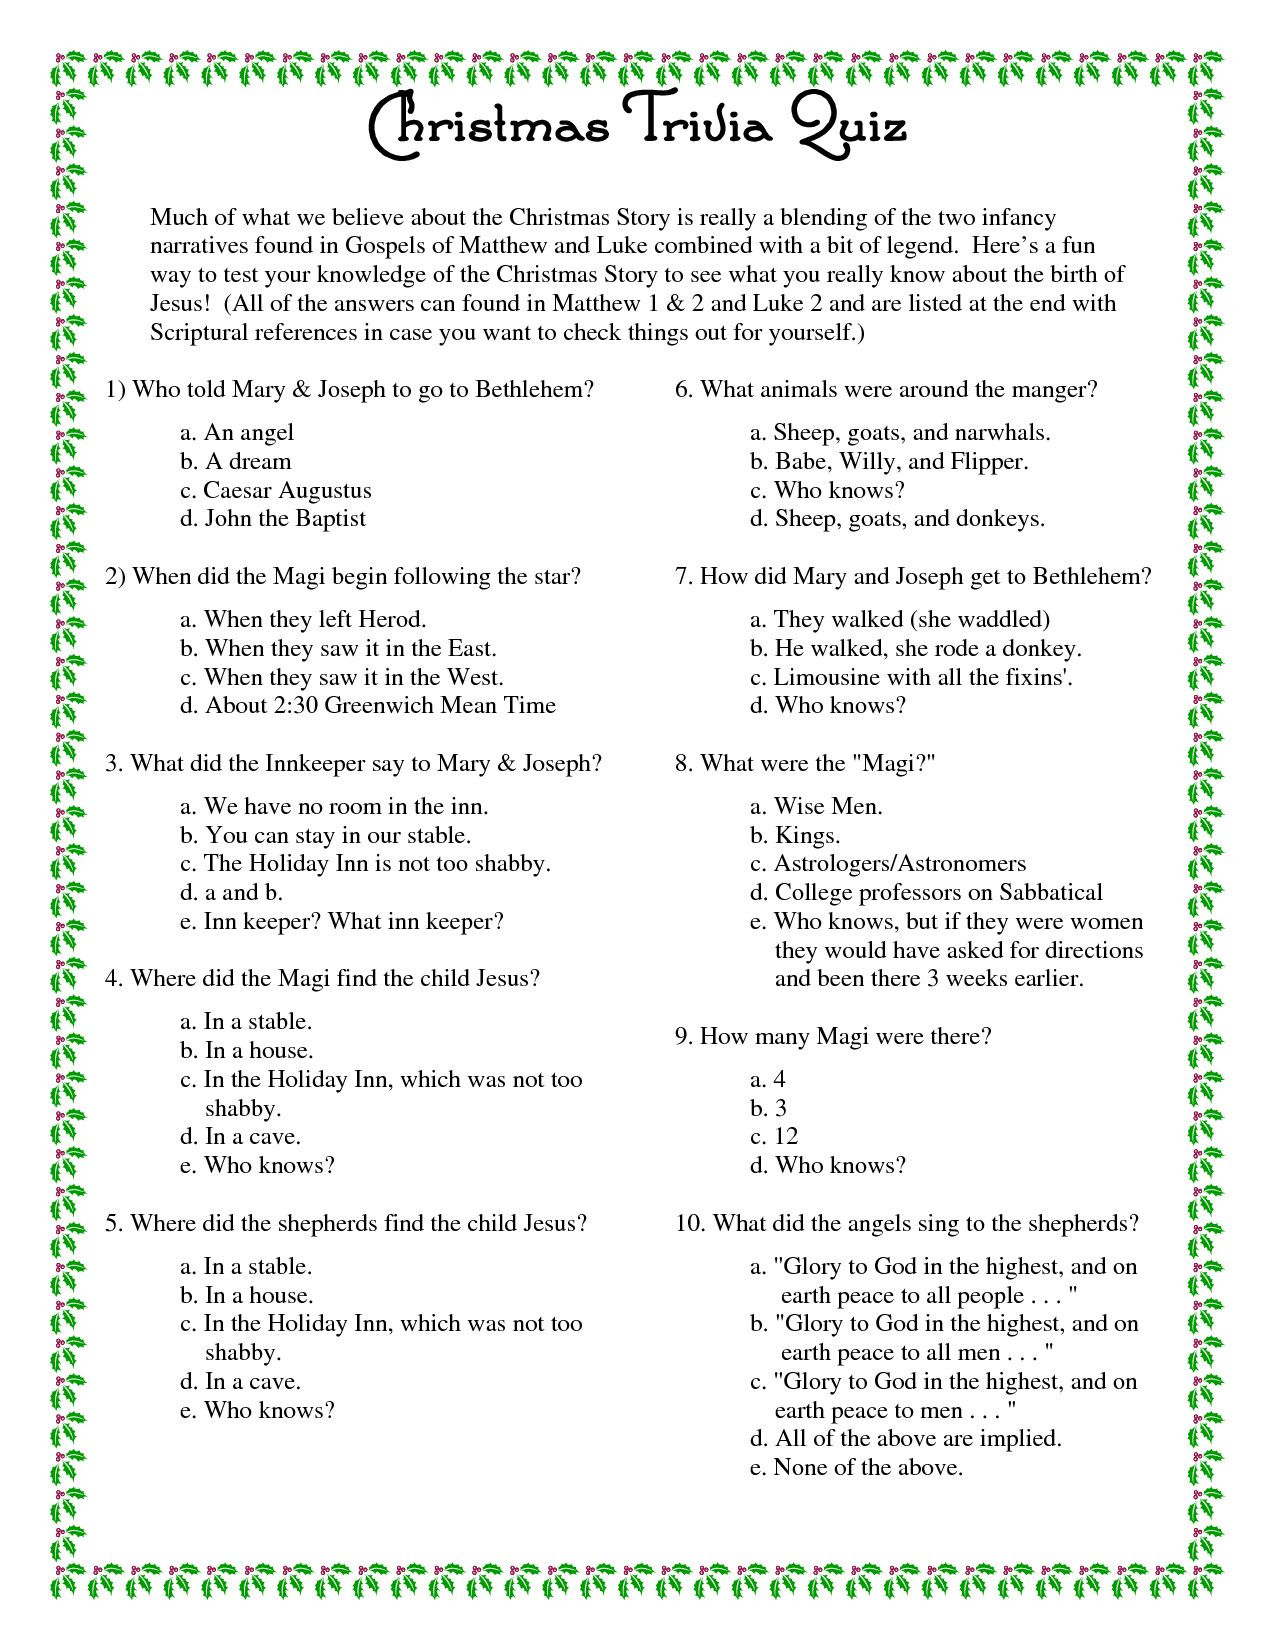 19 Christmas Bible Trivia Questions And Answers Free Printable 